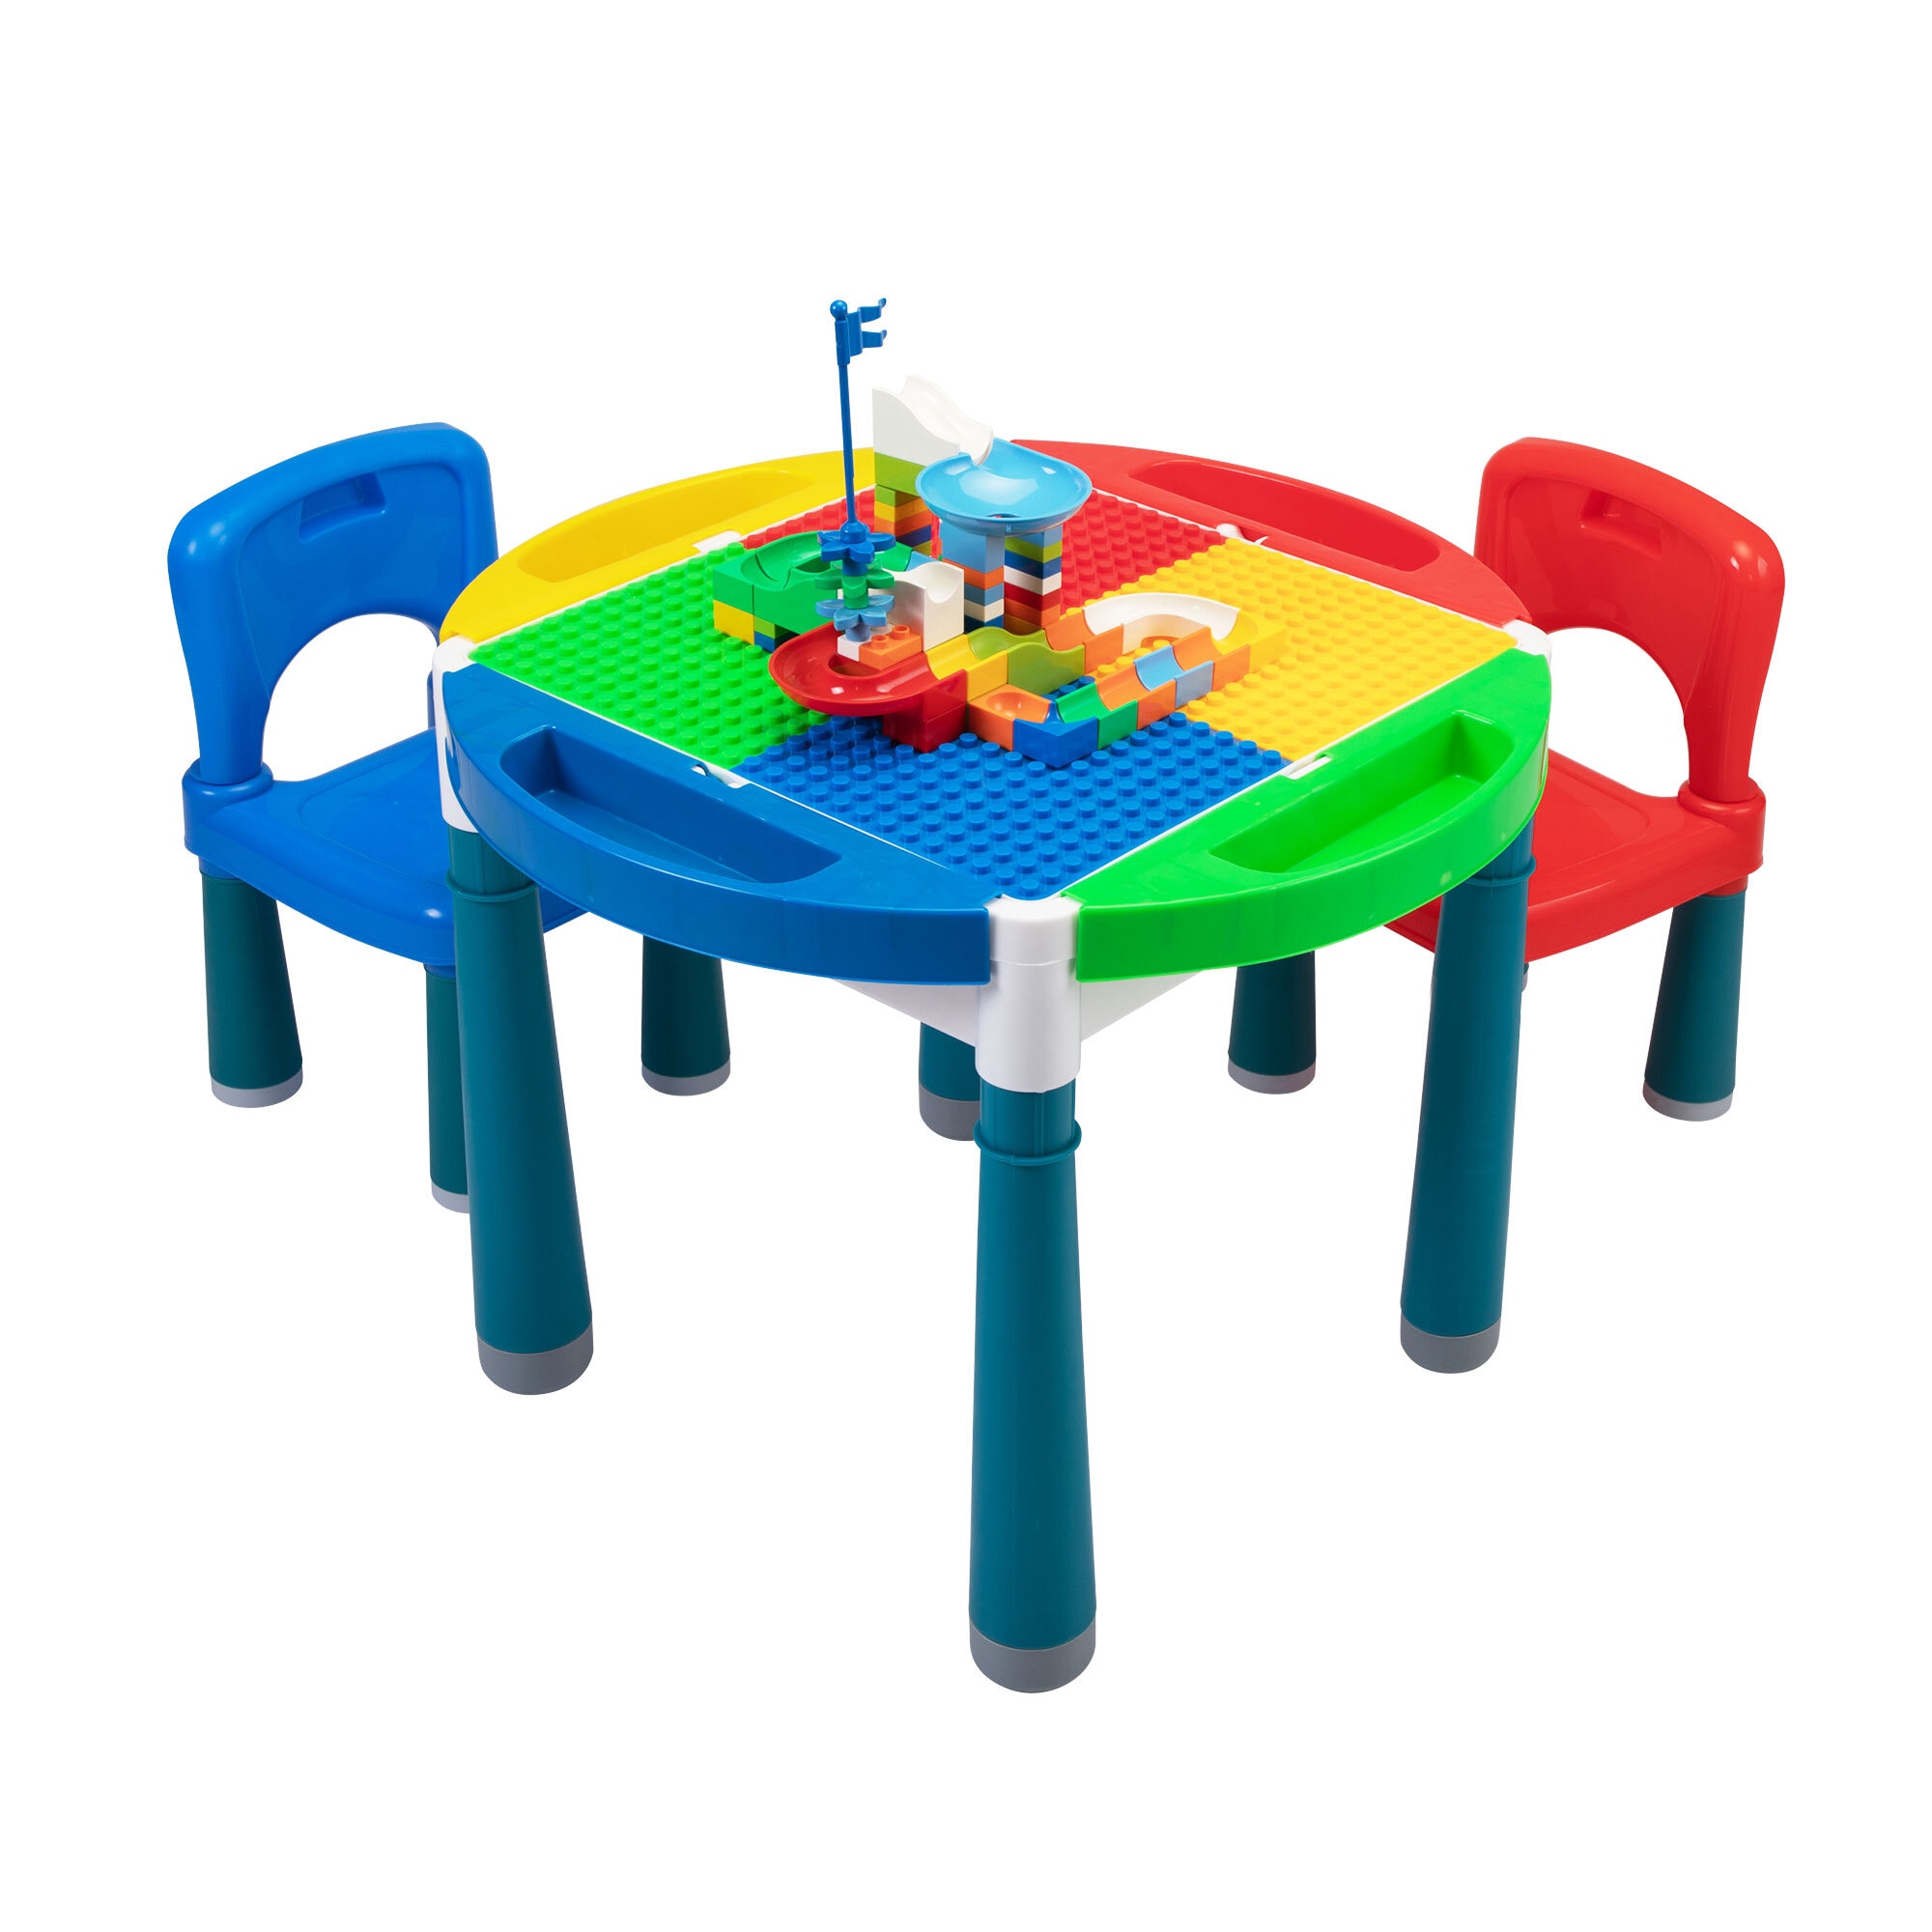 Details about   6-in-1 Kid Activity Table Set w/2 Chairs 71 Large Blocks Building Block Table 